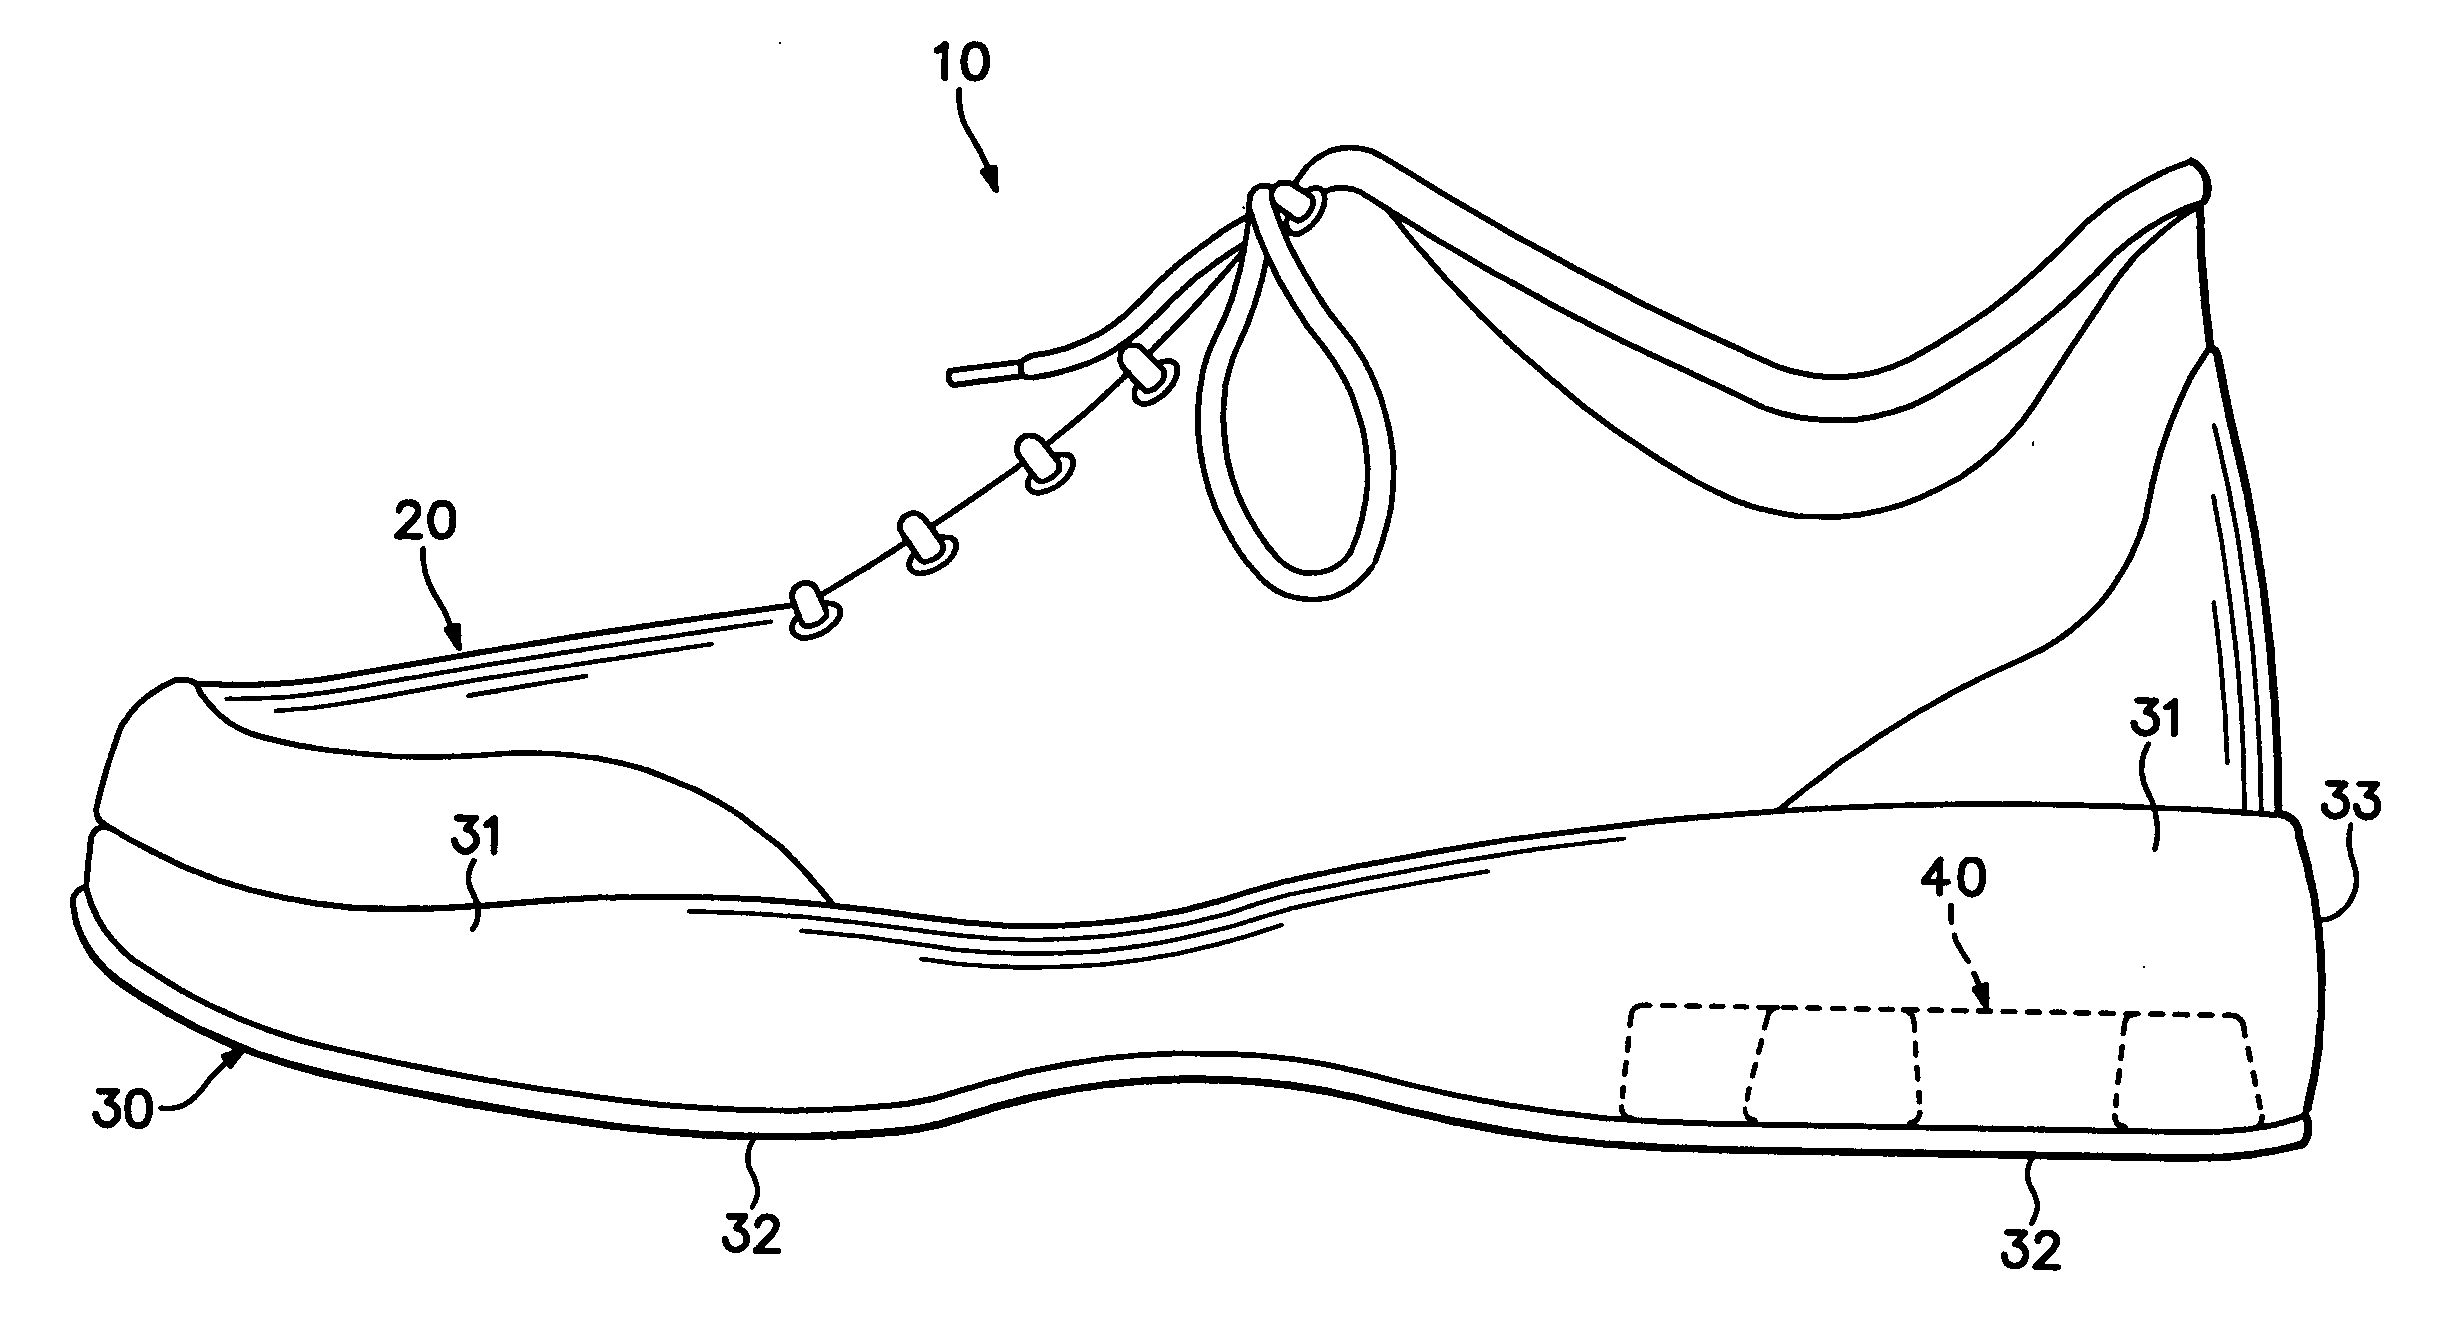 Footwear with a sole structure incorporating a lobed fluid-filled chamber